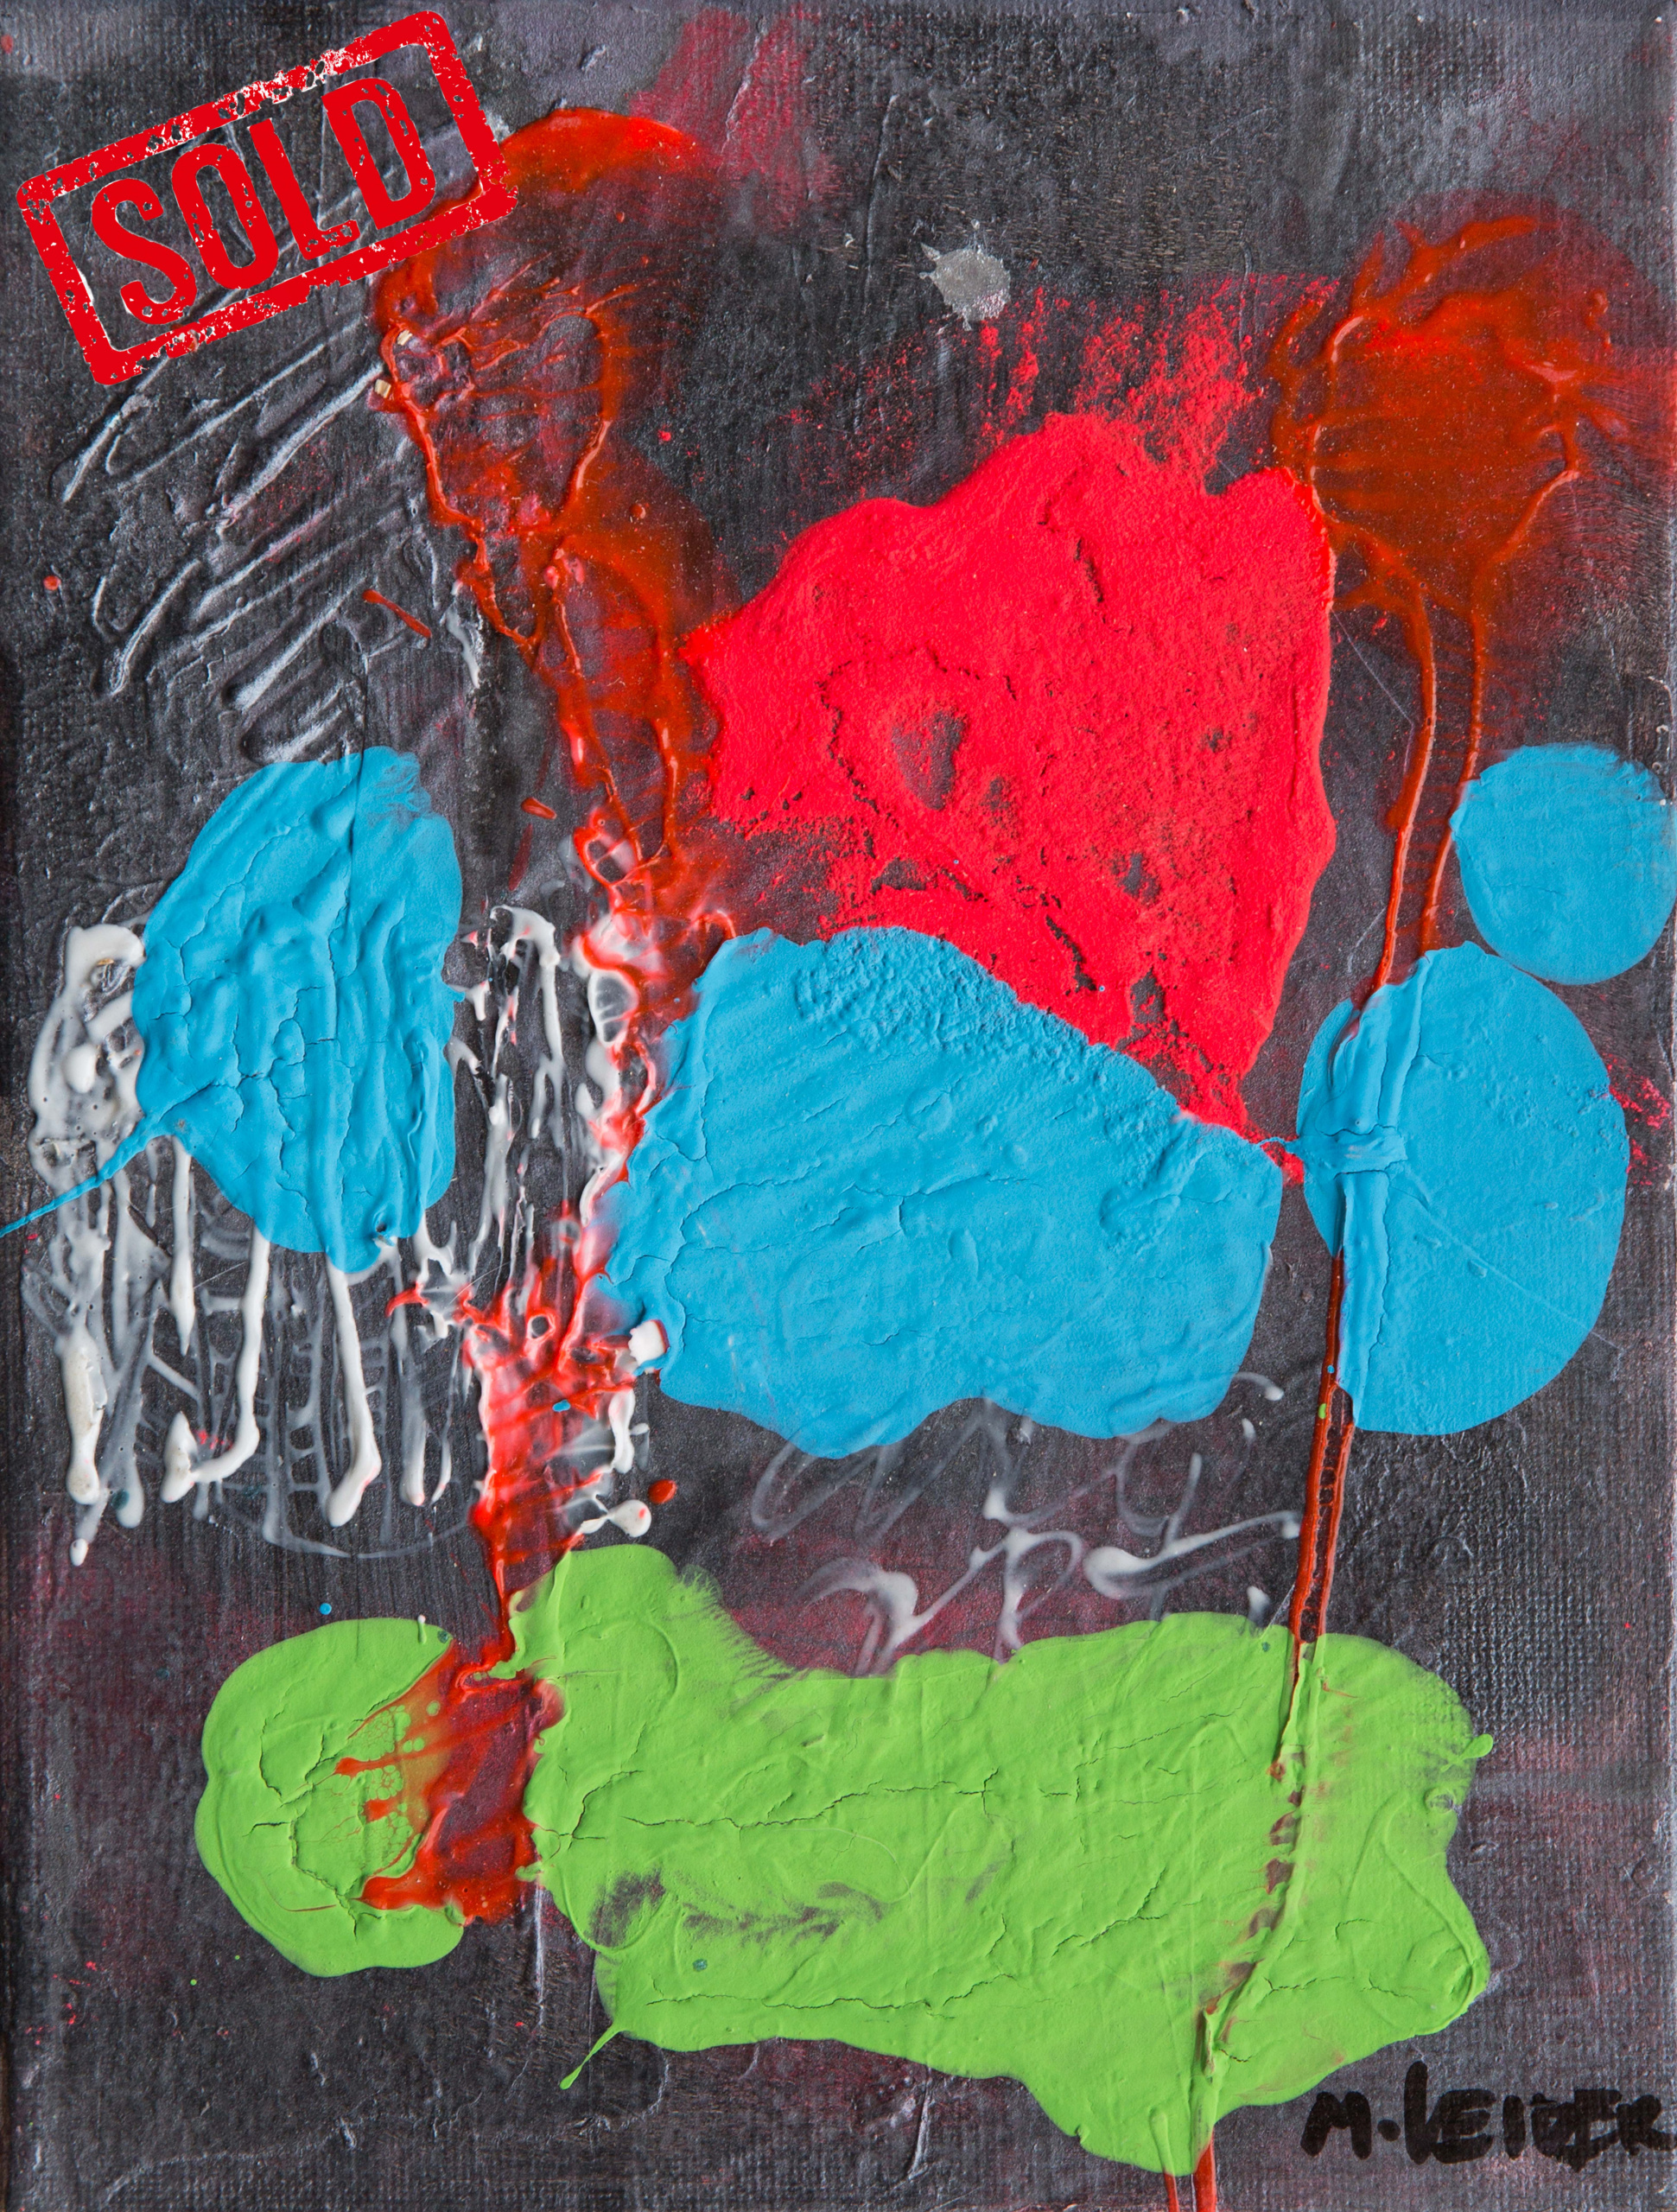 “Abstract with red and blue” by Moshe Leider